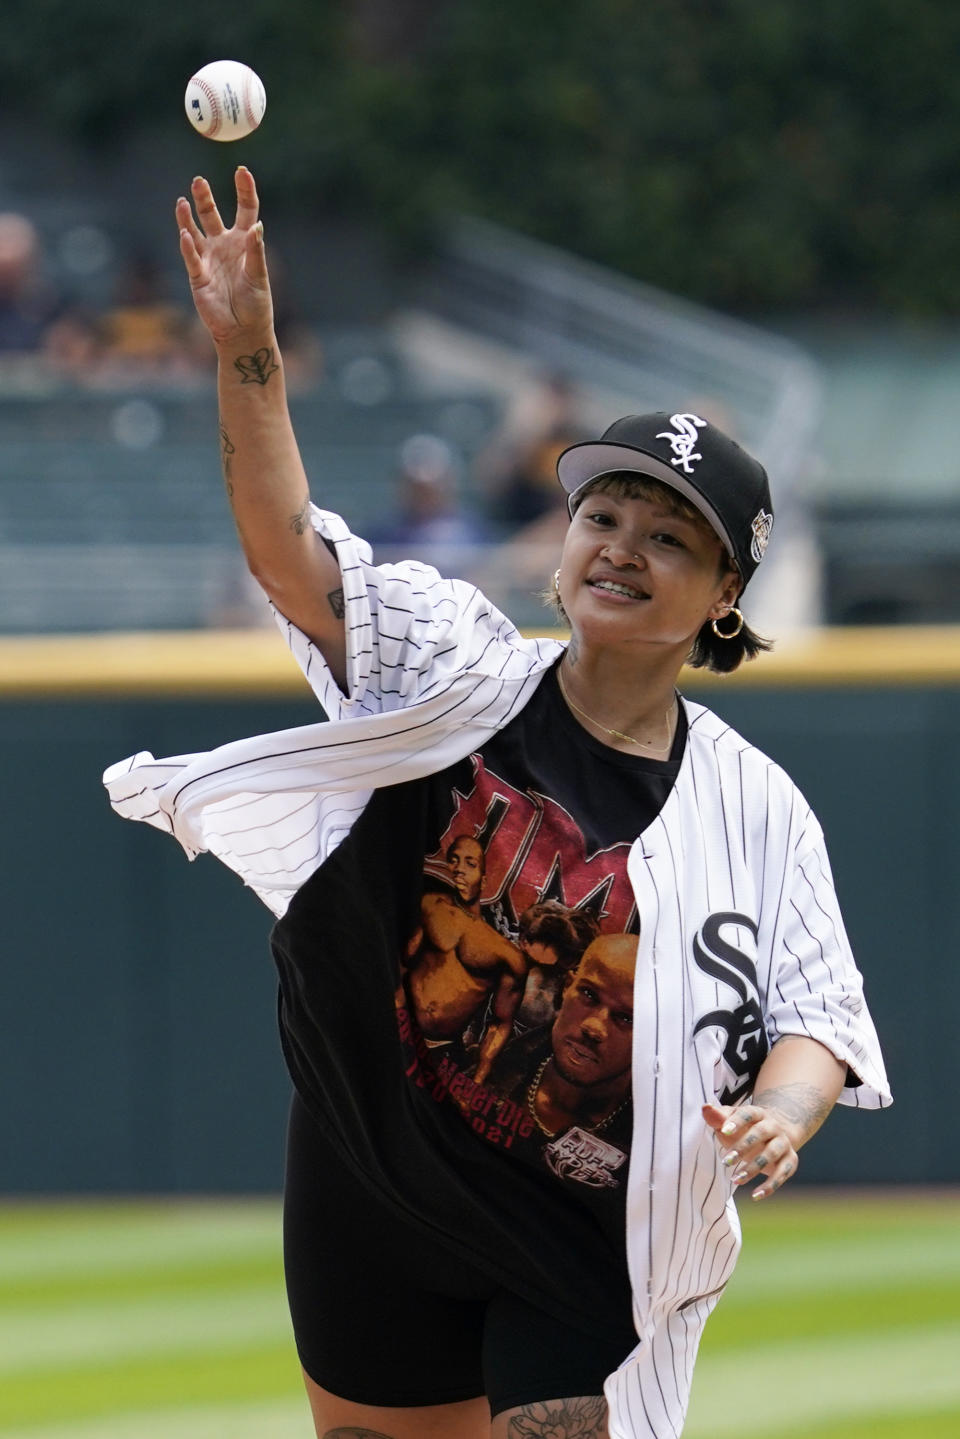 Singer King Marie throws out a ceremonial first pitch before a baseball game between the Cleveland Guardians and the Chicago White Sox in Chicago, Sunday, July 24, 2022. (AP Photo/Nam Y. Huh)